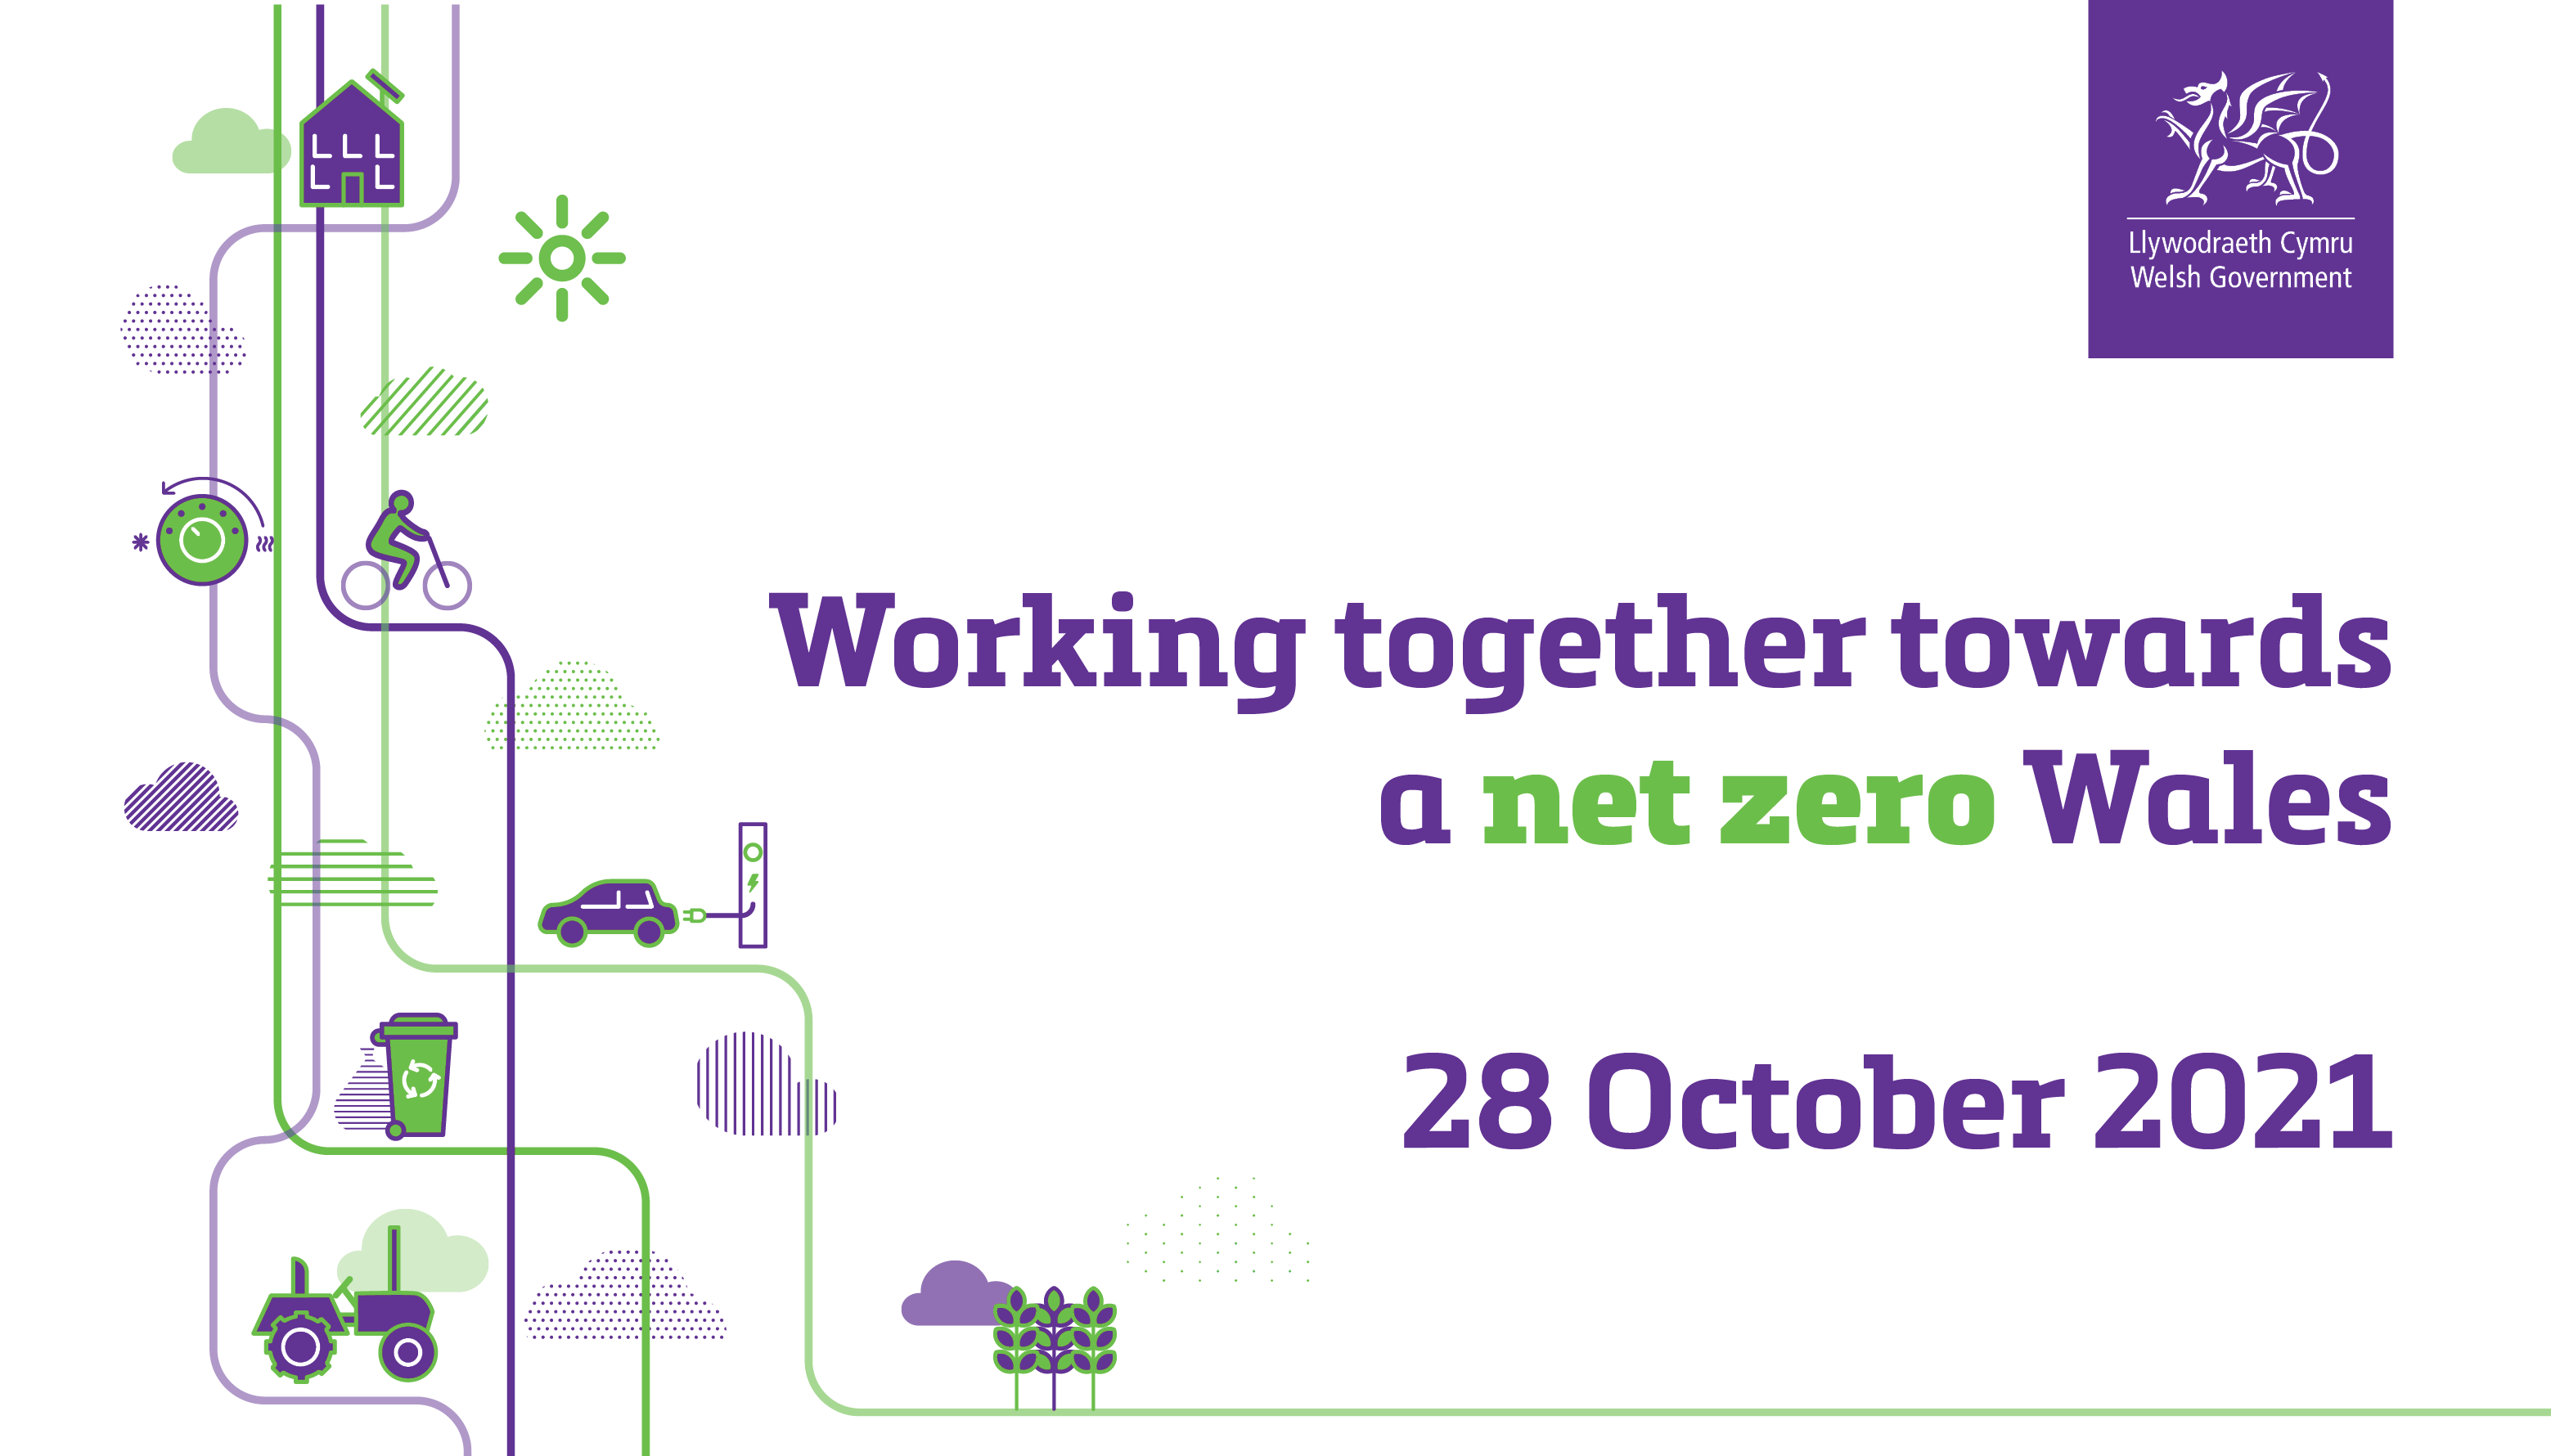  Net Zero Wales launches encouraging people to live environmentally friendly lives